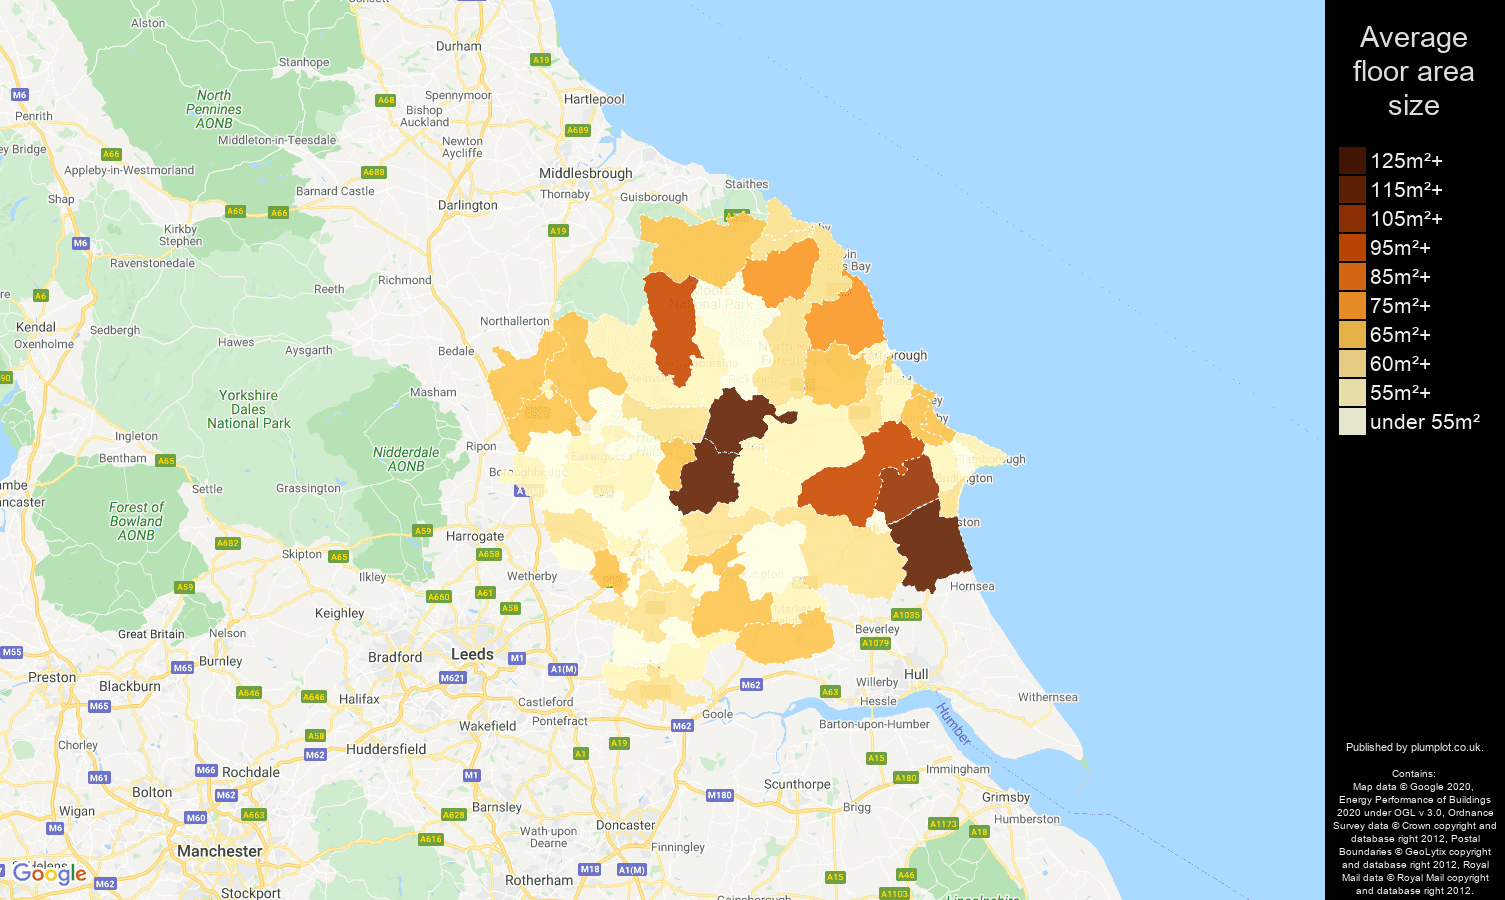 York map of average floor area size of flats